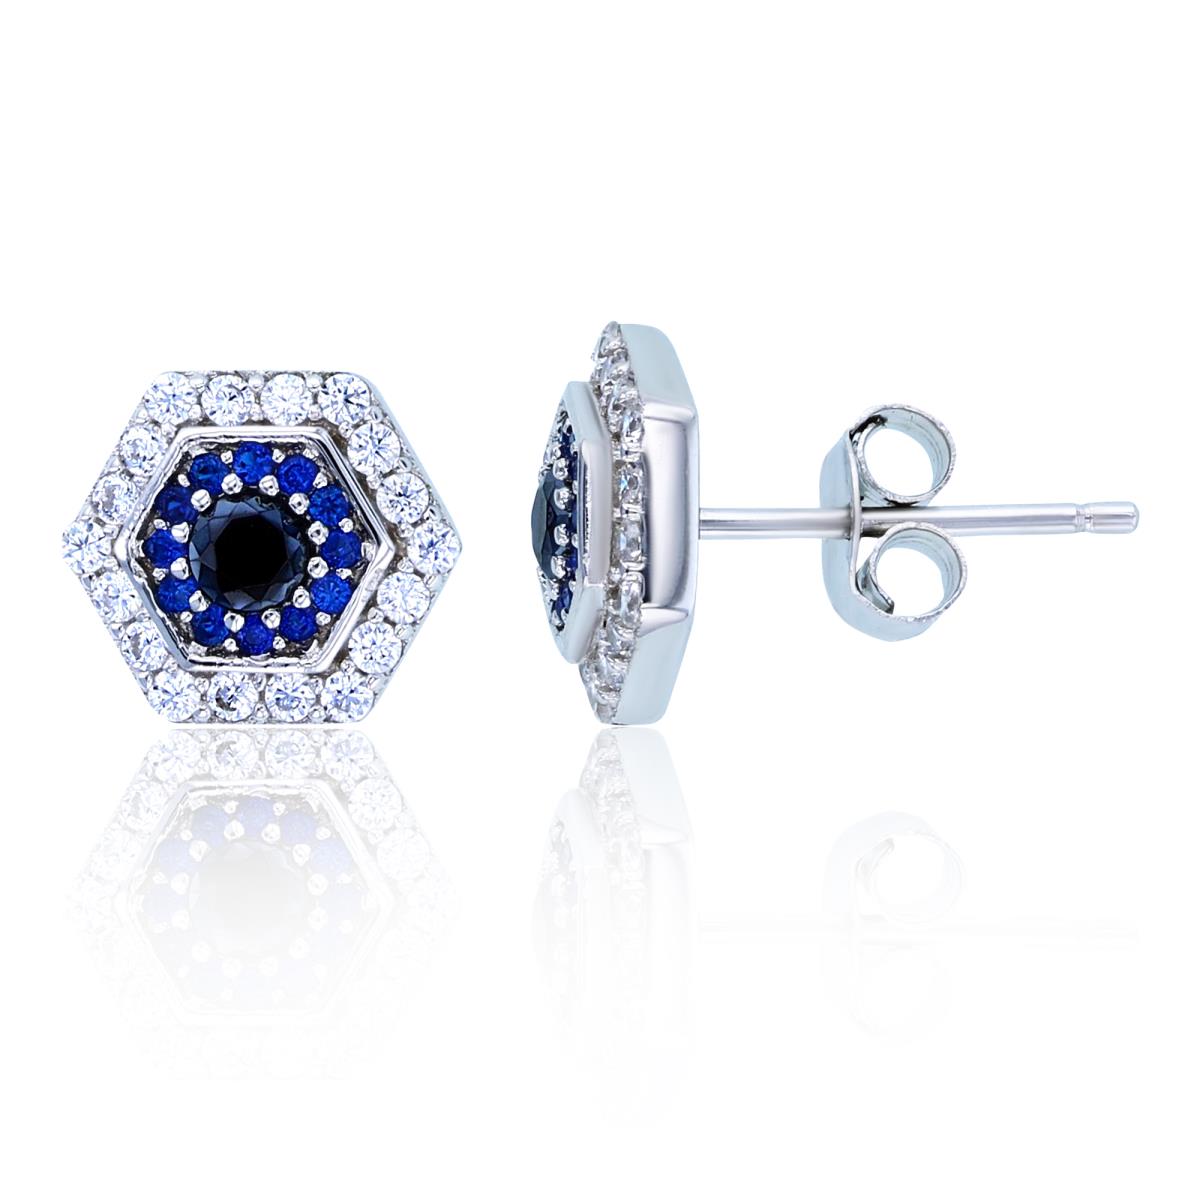 Sterling Silver Rhodium Rnd White /Black /#114 Blue Spinel Octagon Studs Earrings